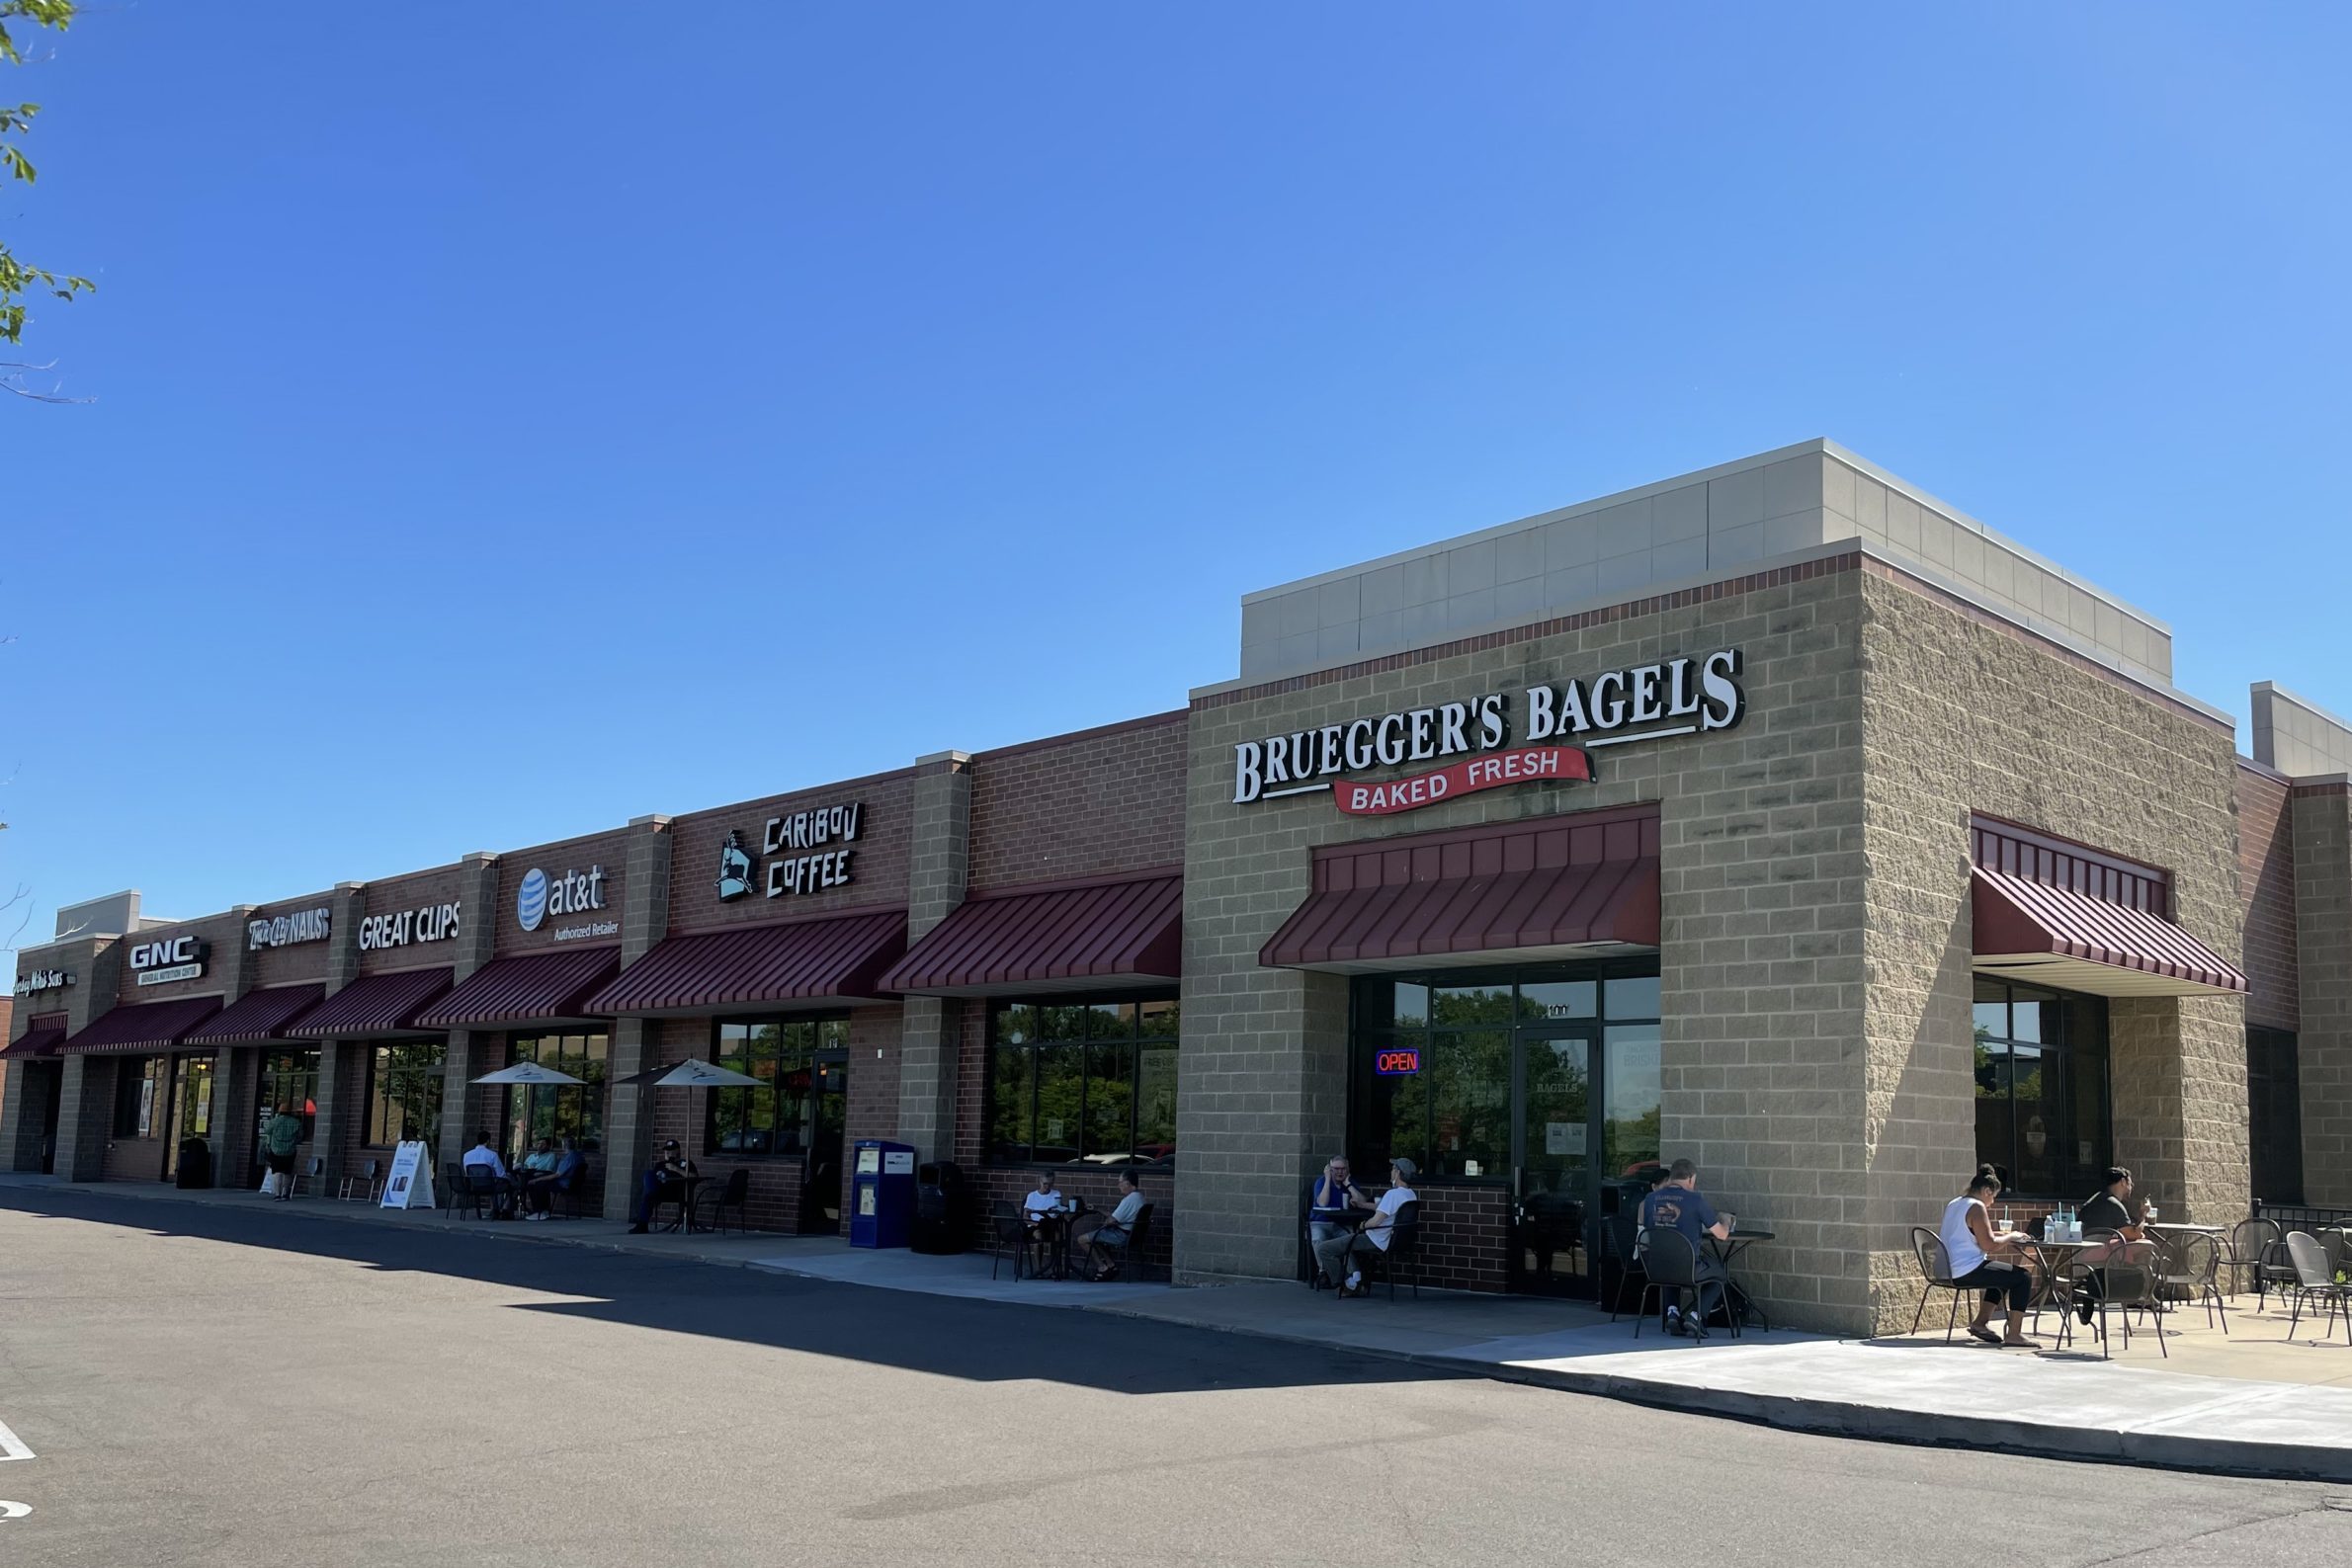 Breugger's Bagels and other stores